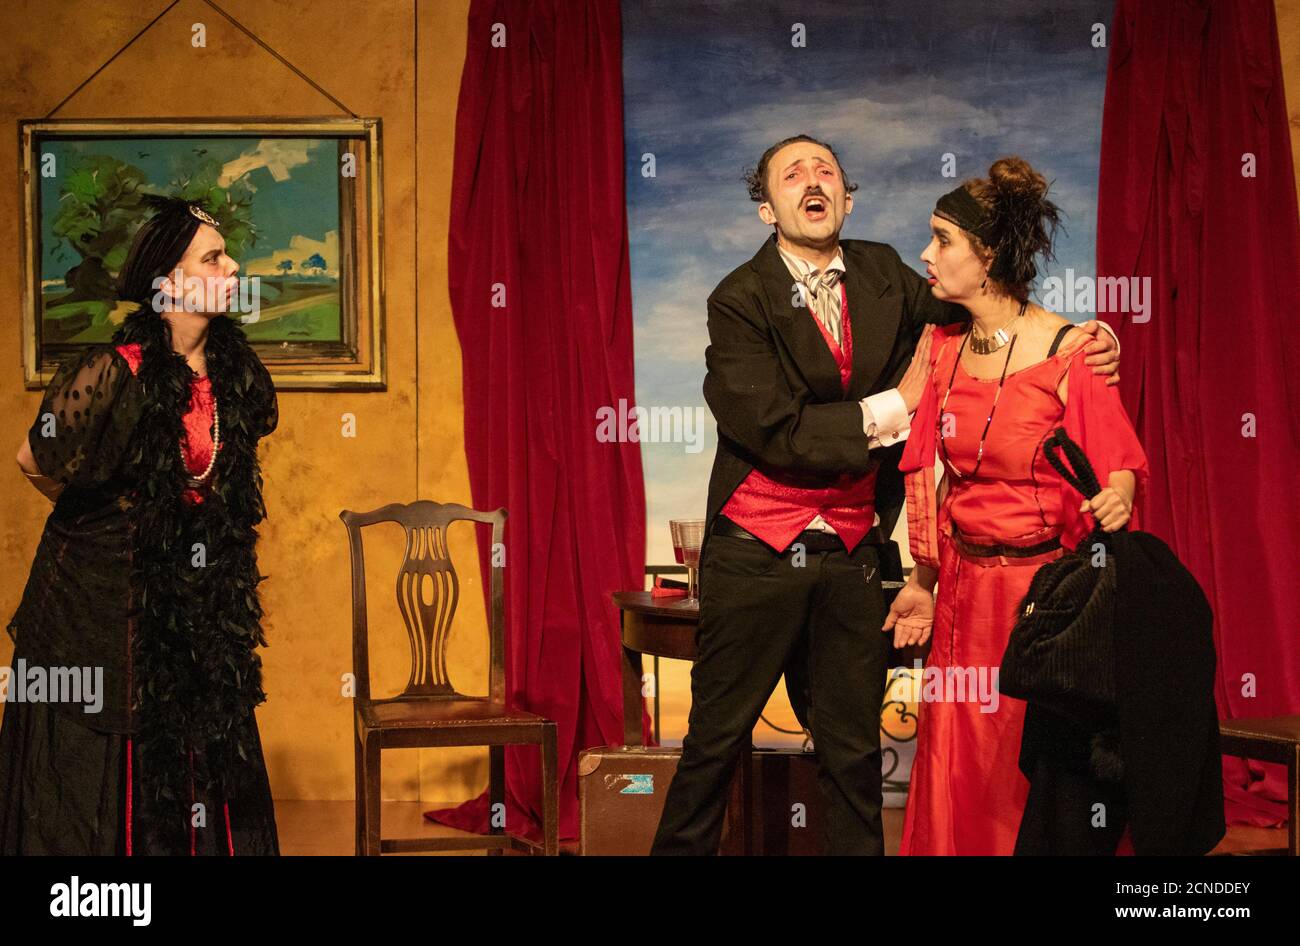 Actors Amy Gibbons, Shea Wotjus and Claudio Del Toro perform the comedy The Affair Stock Photo